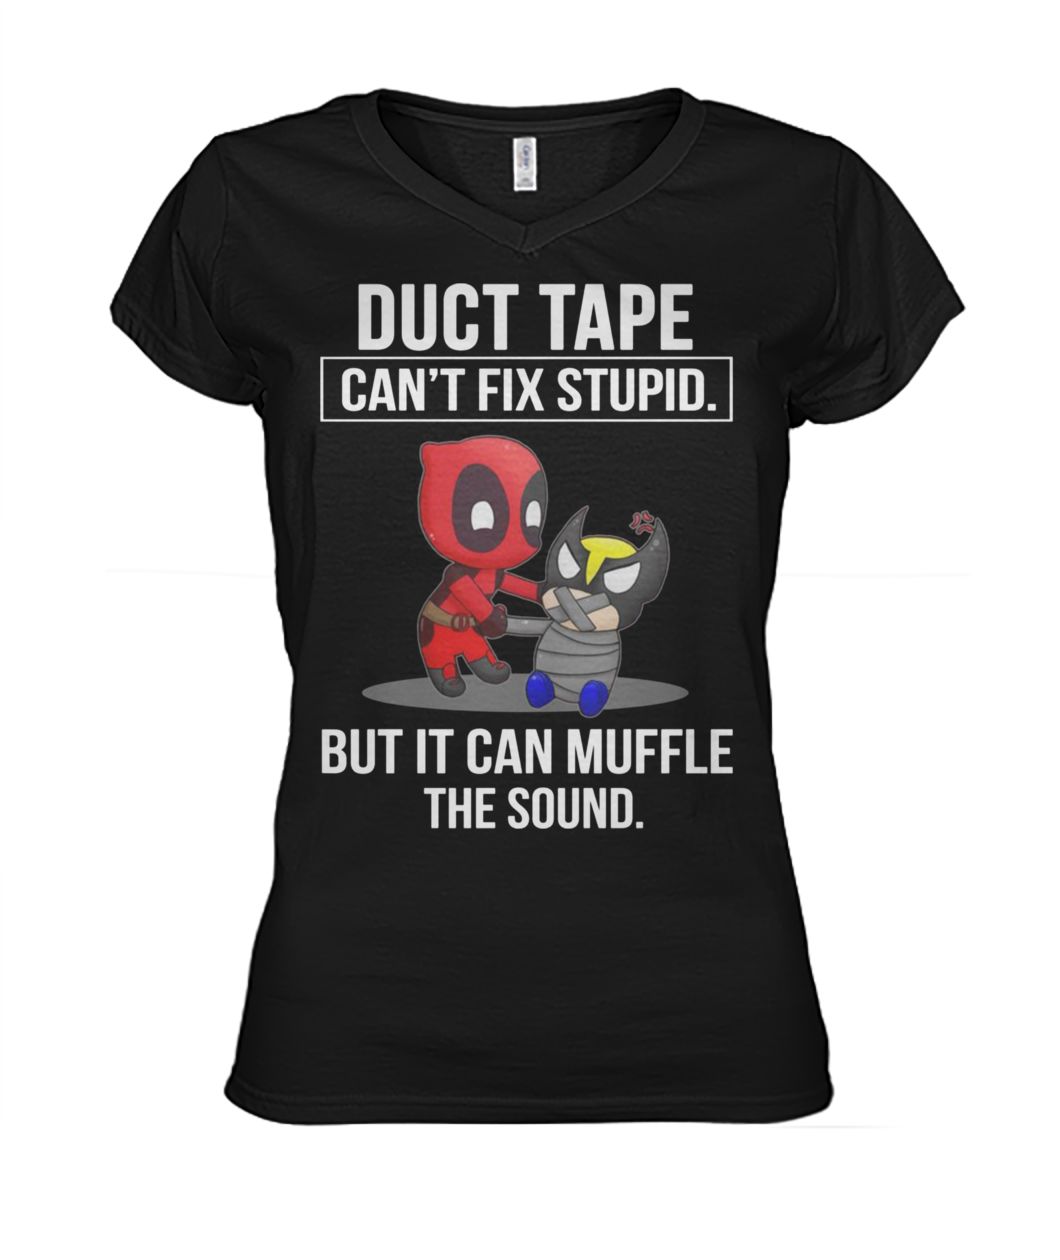 Deadpool duct tape it can't fix stupid but it can muffle the sound women's v-neck